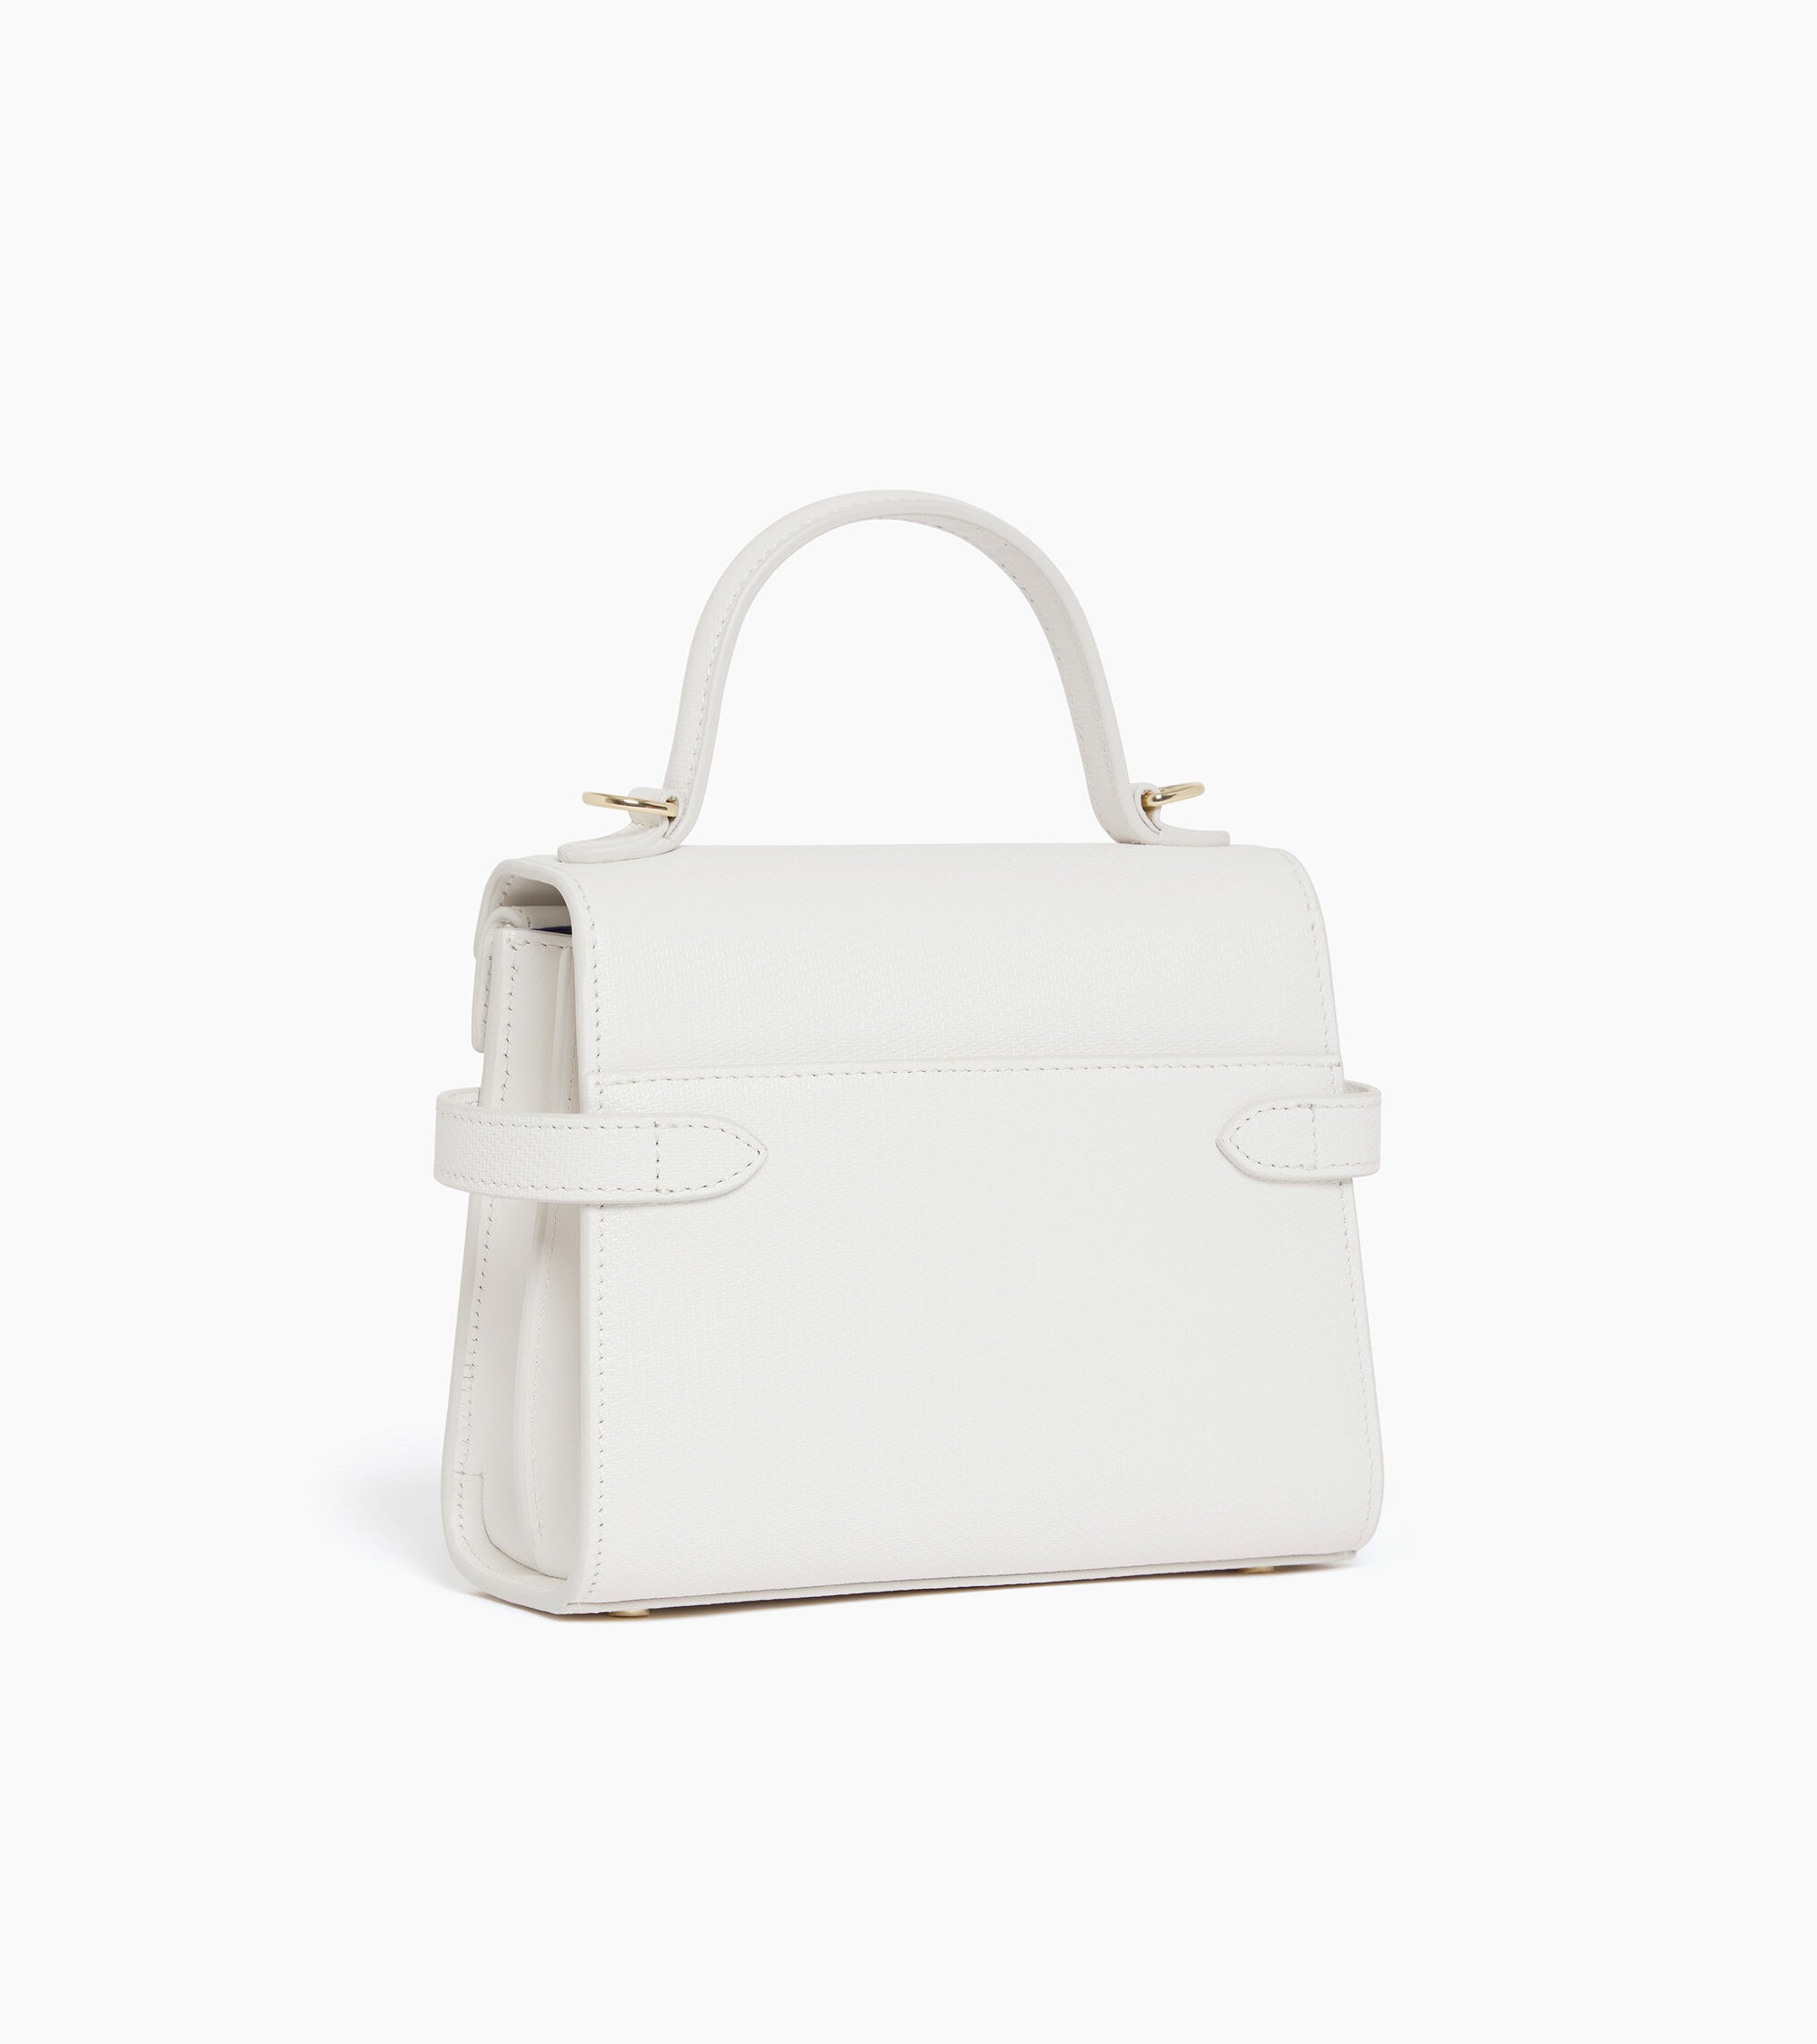 Emilie small double flap handbag in signature T leather